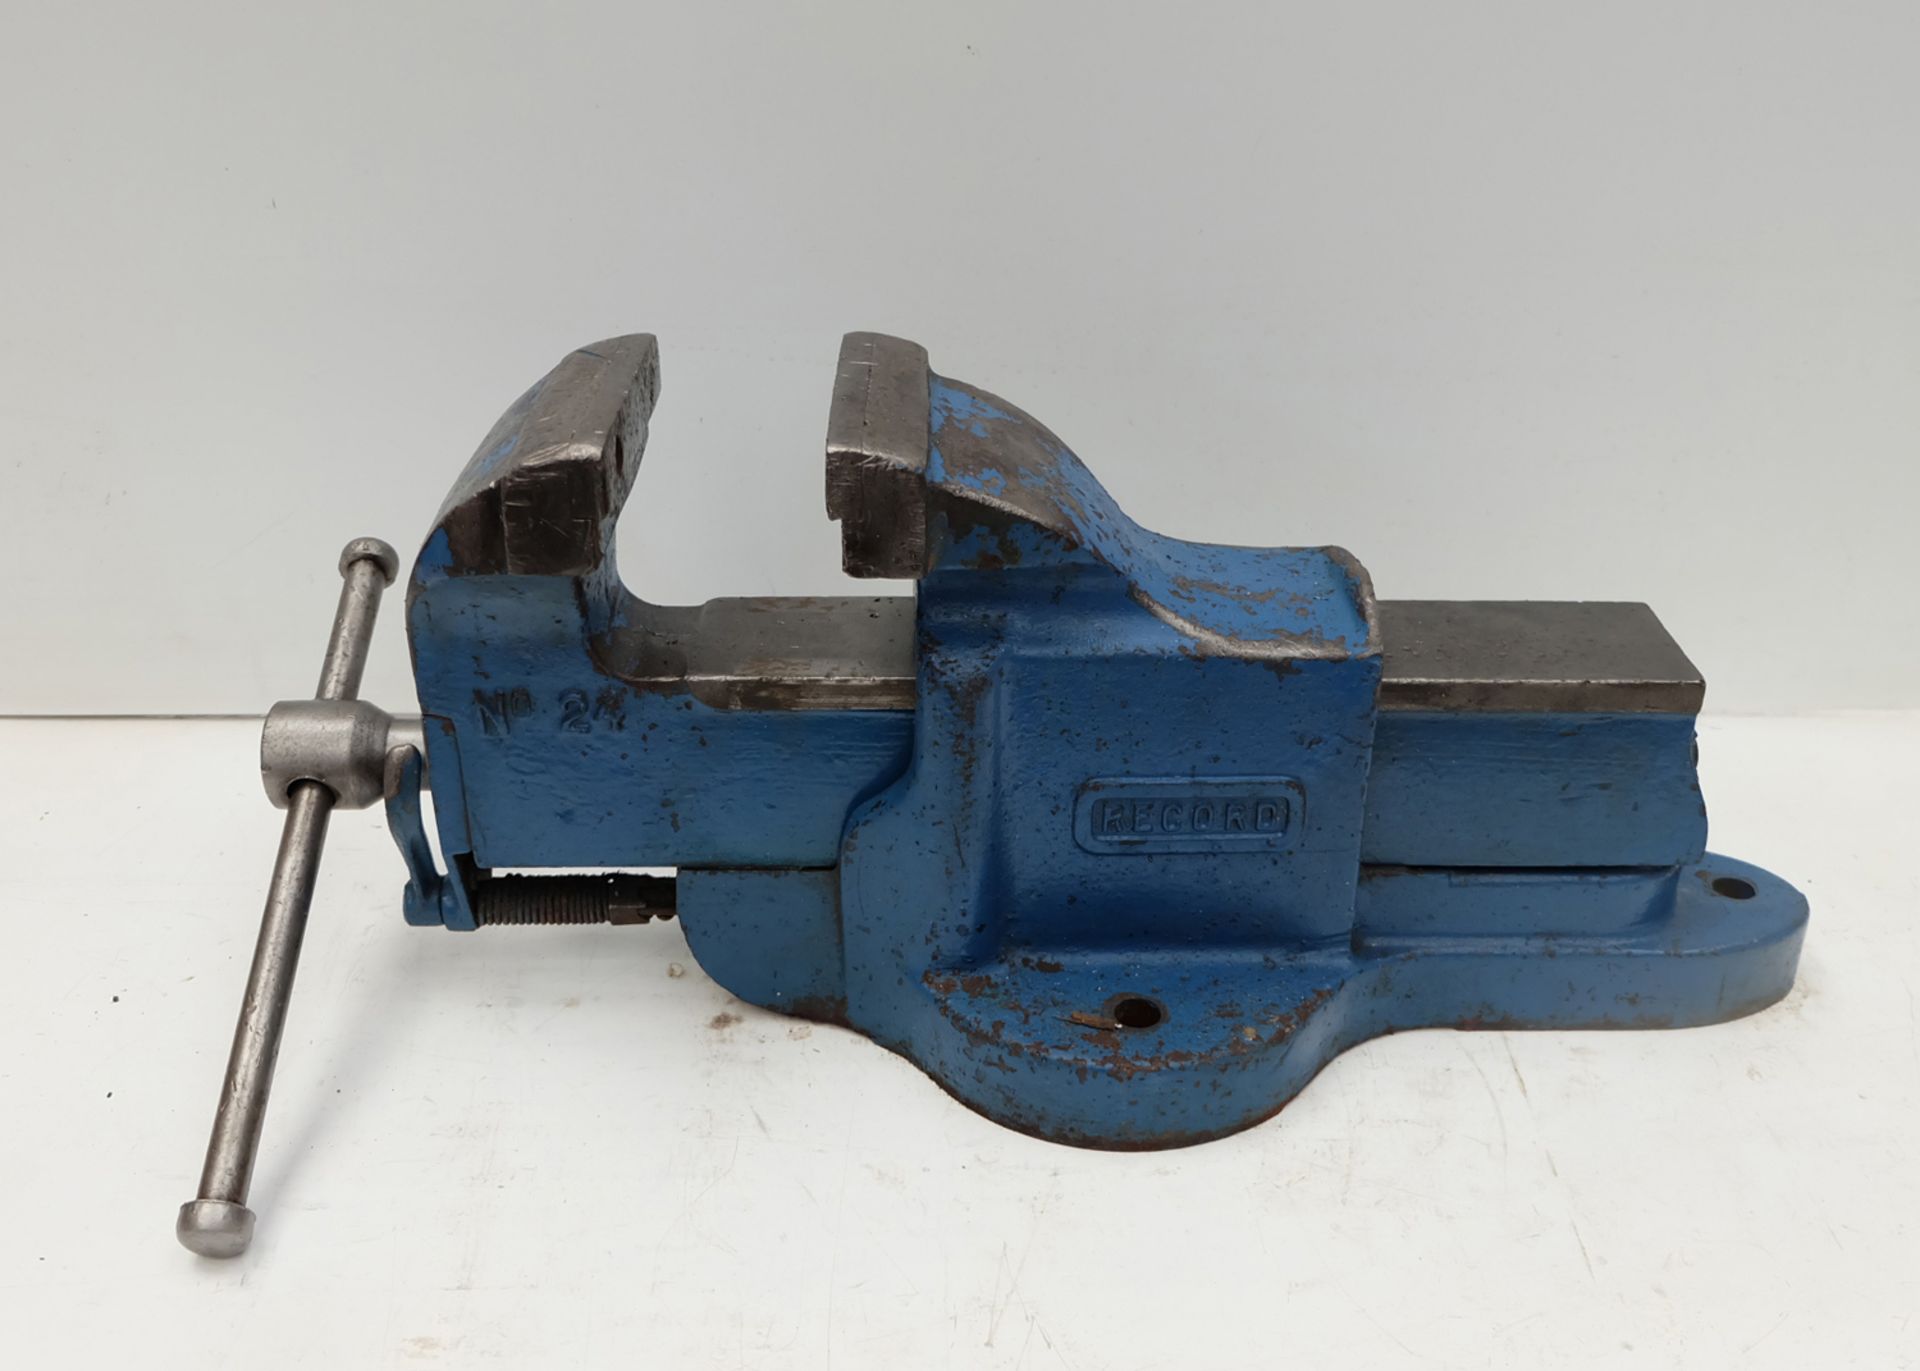 Record No.24 Quick Release Bench Vice. Jaw Size 5 1/4".